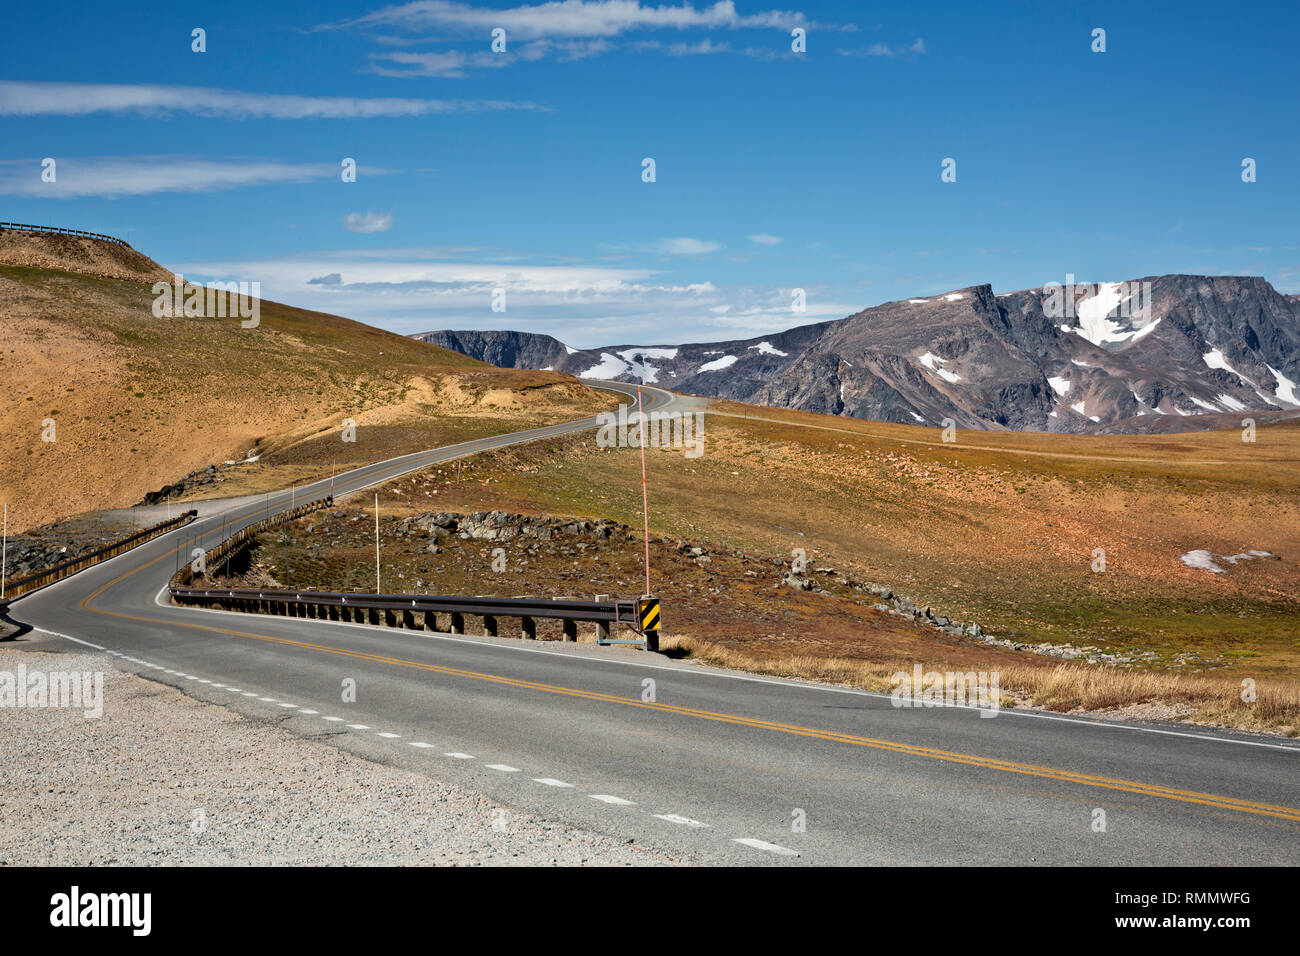 WY03736-00...WYOMING - la Beartooth Highway sul lato nord della Beartooth Pass Summit in Shoshone National Forest. Foto Stock